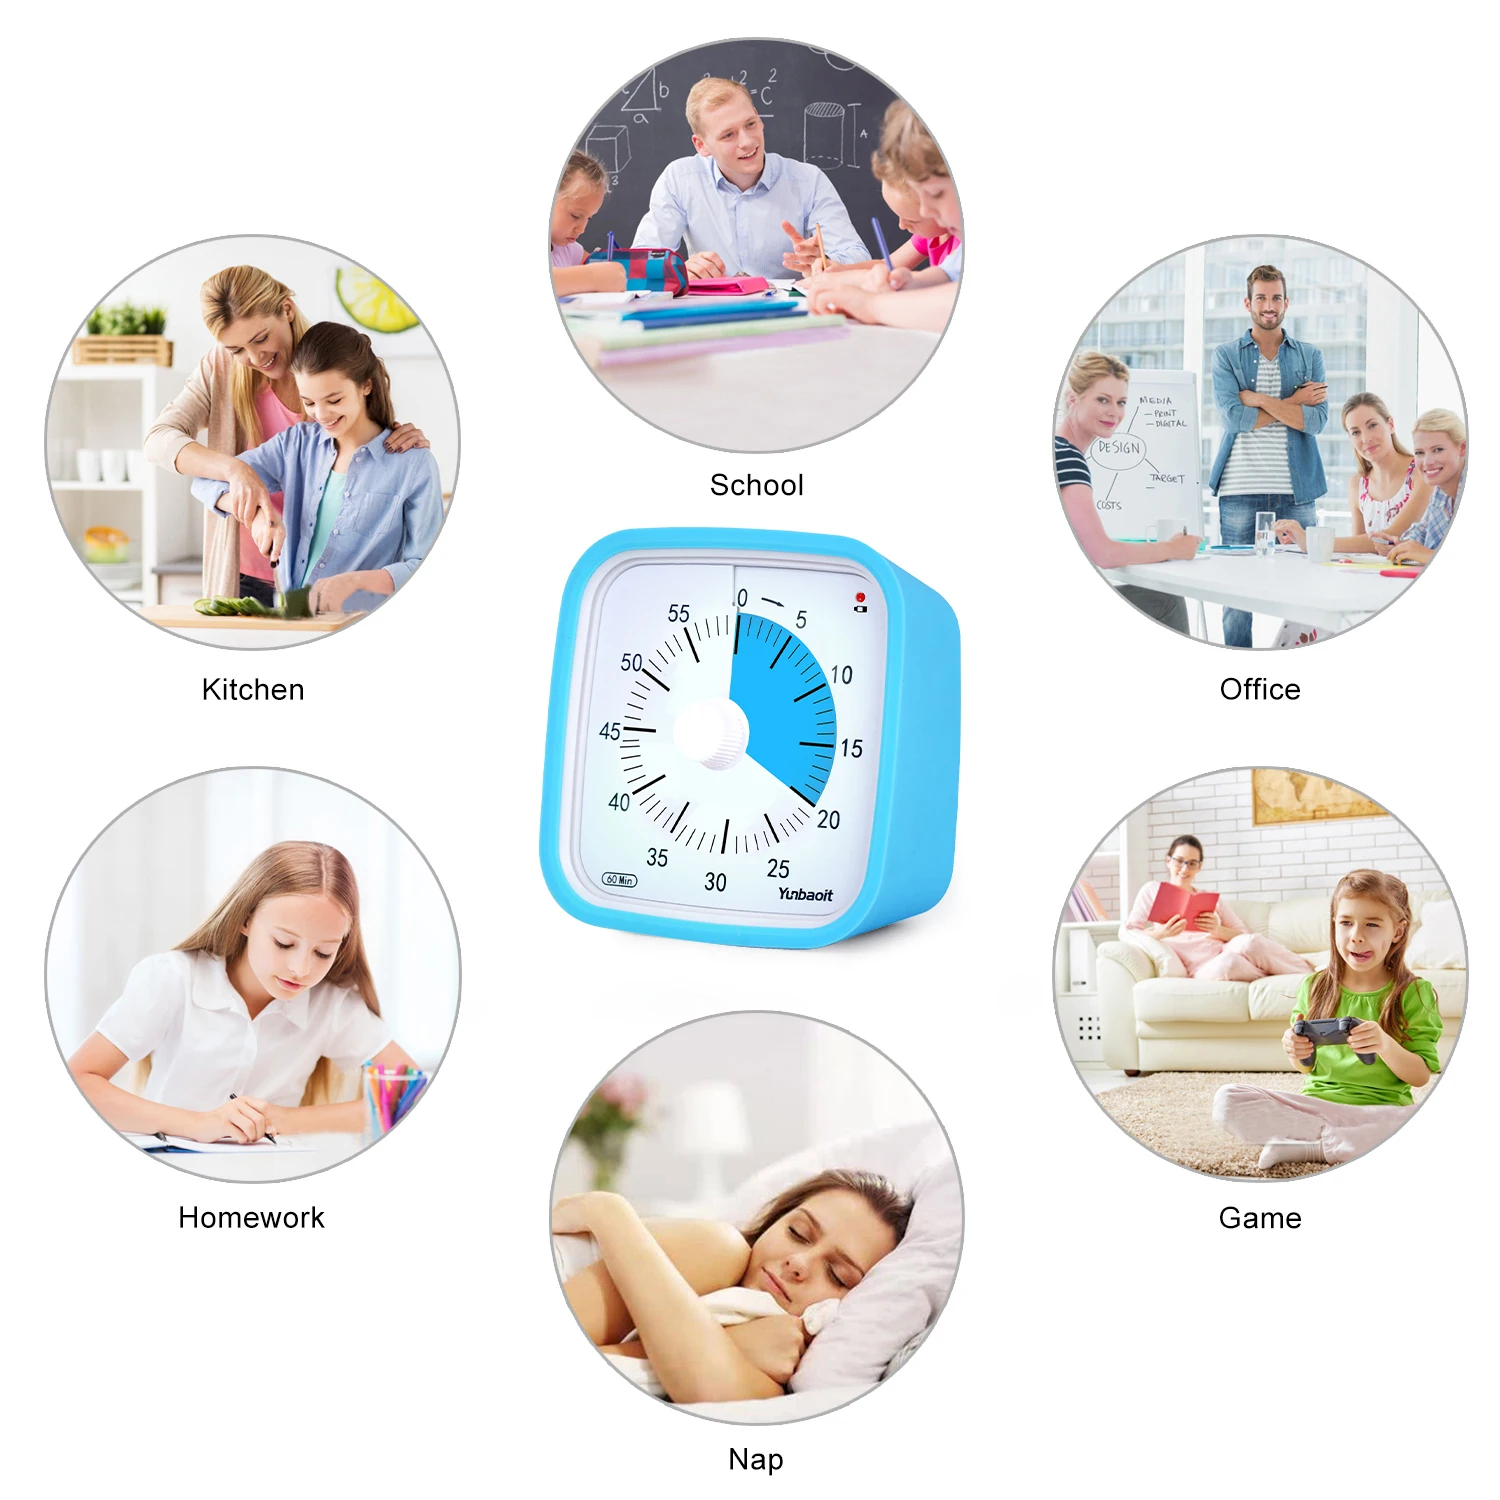 Yunbaoit Timer With Night Light For Teaching, Cooking, Meeting And